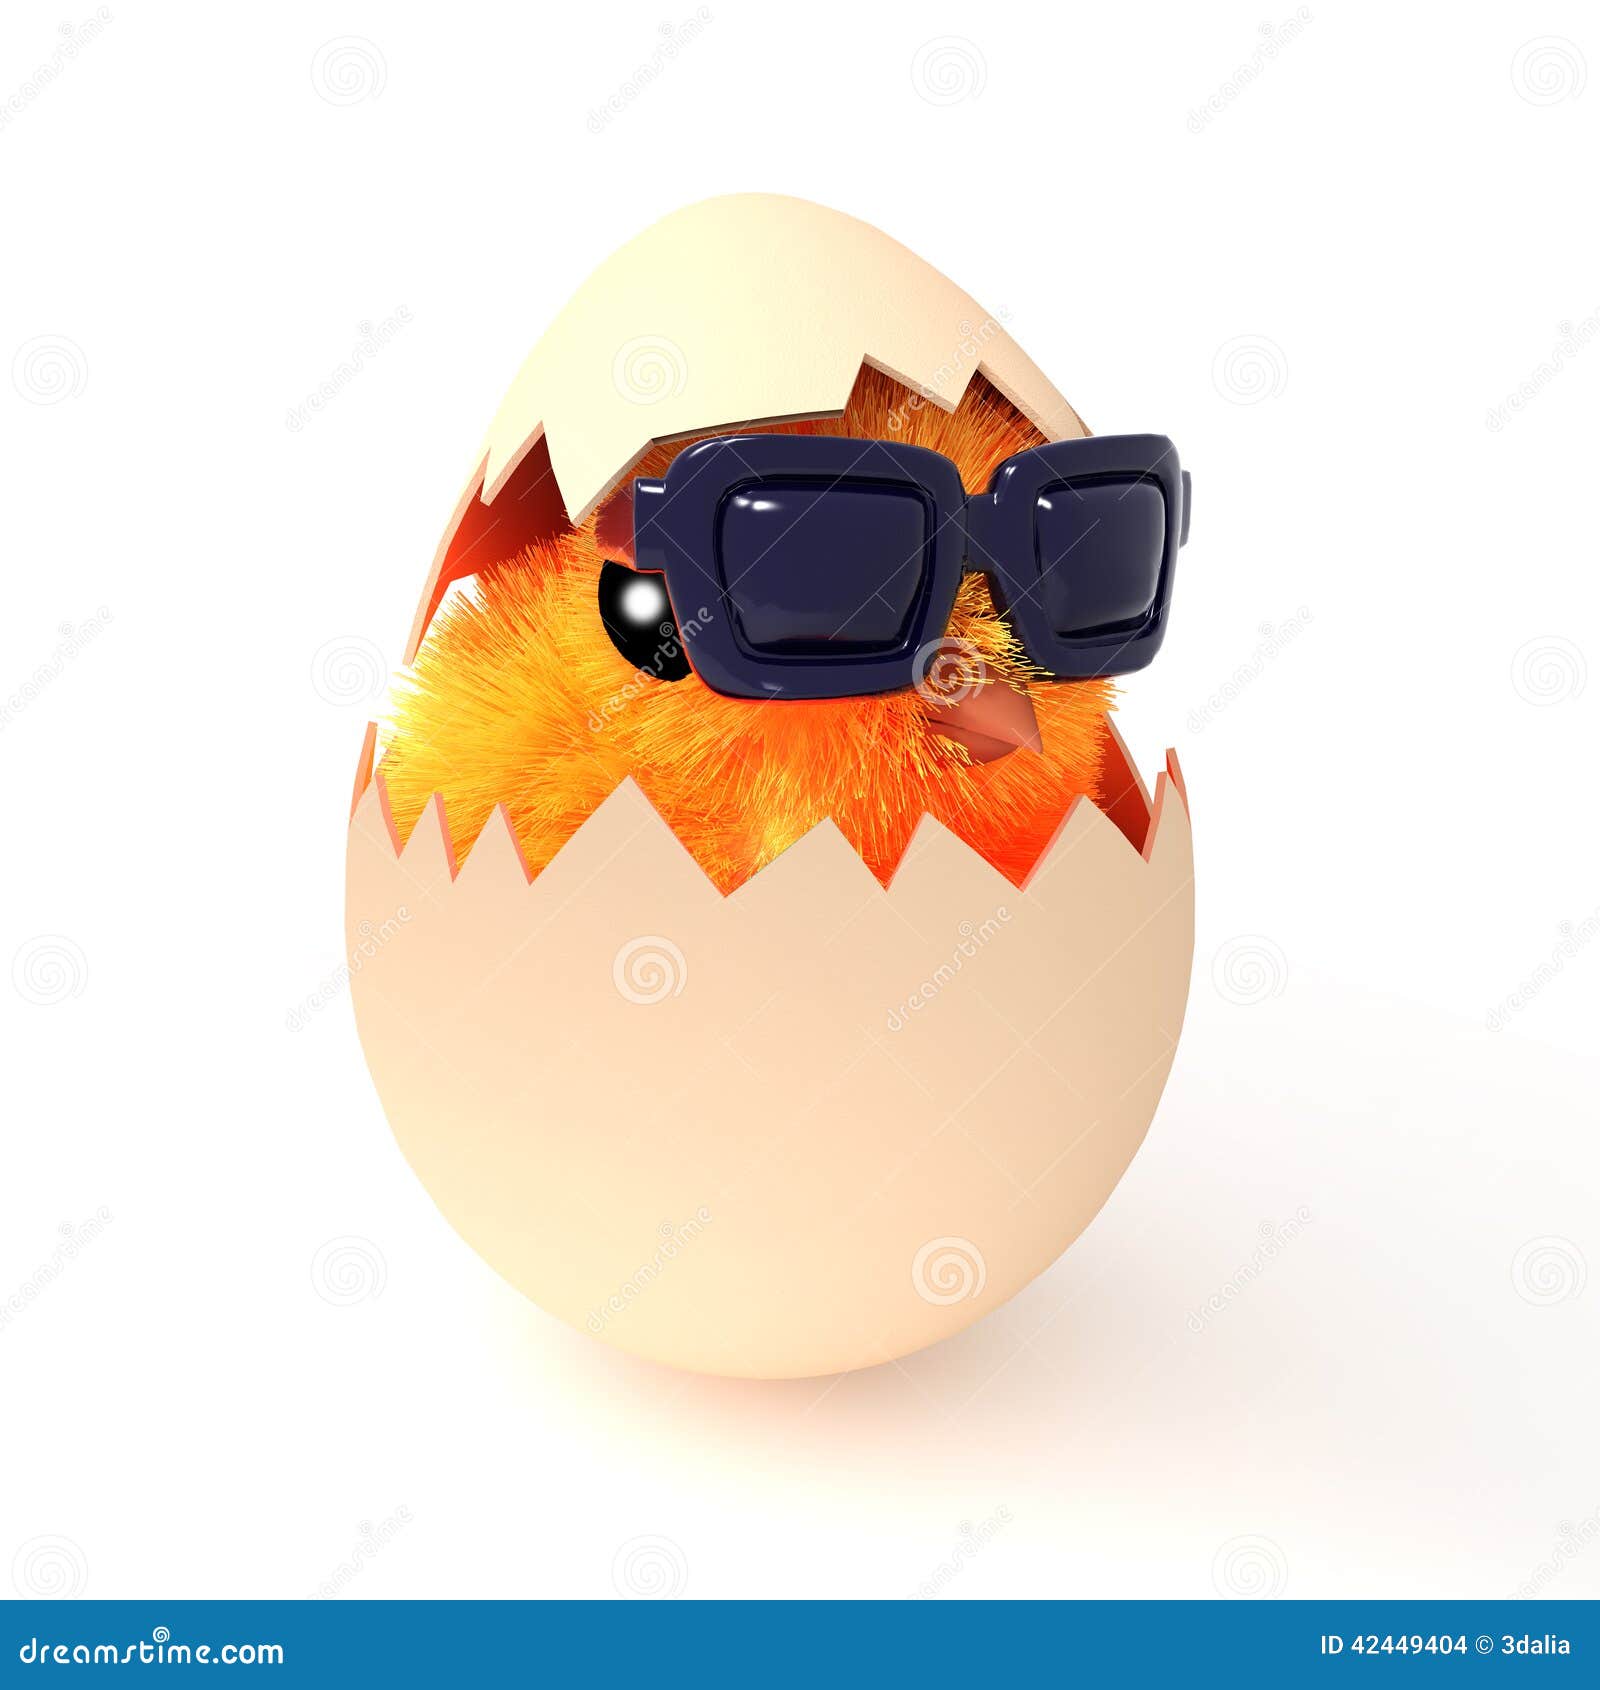 d-easter-chick-hatches-wearing-sunglasses-render-hatching-egg-42449404.jpg